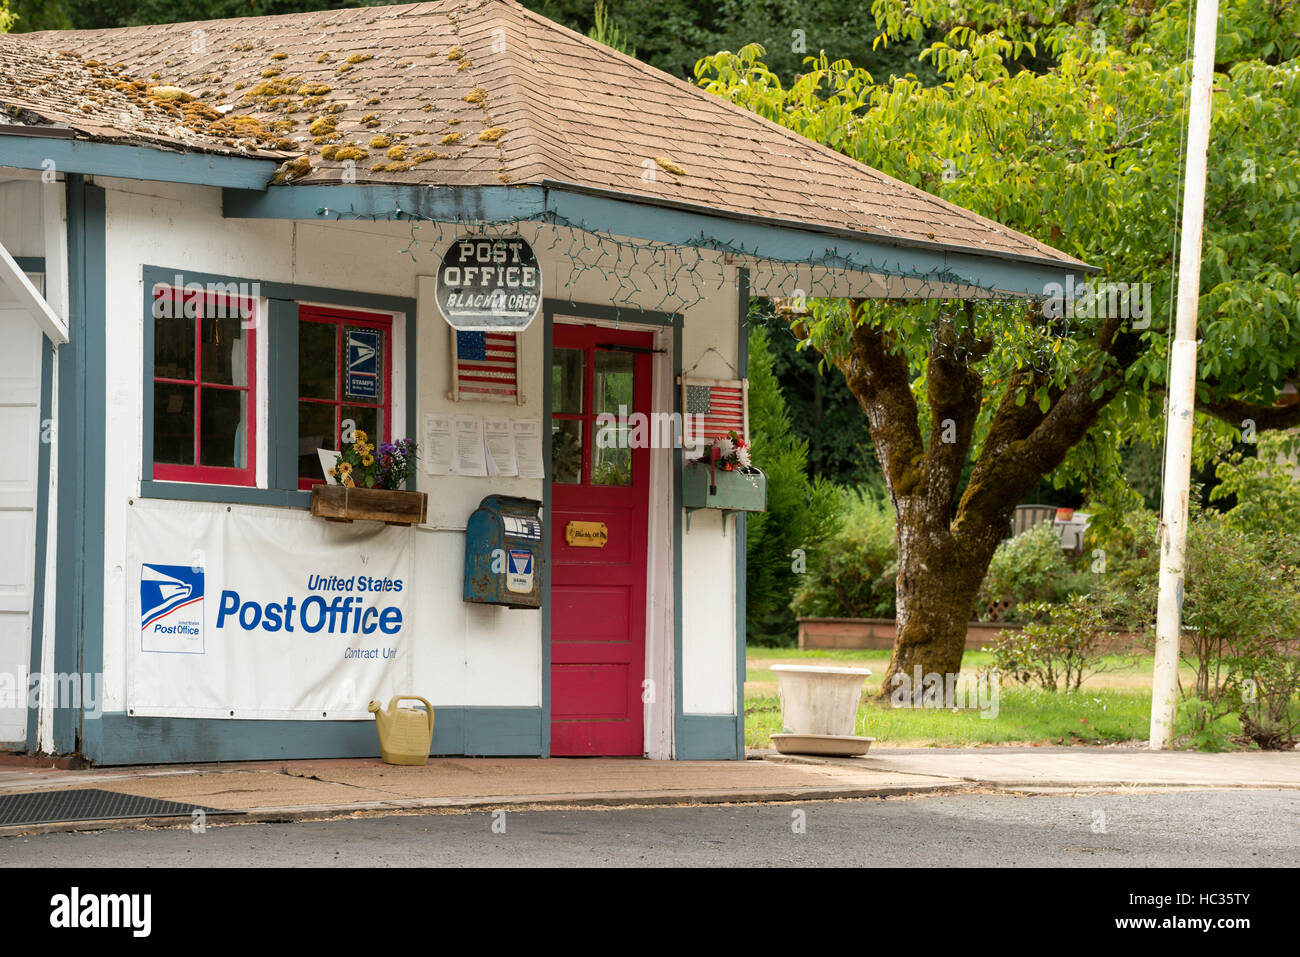 The Blachly Post Office in rural Lane County, Oregon Stock Photo - Alamy